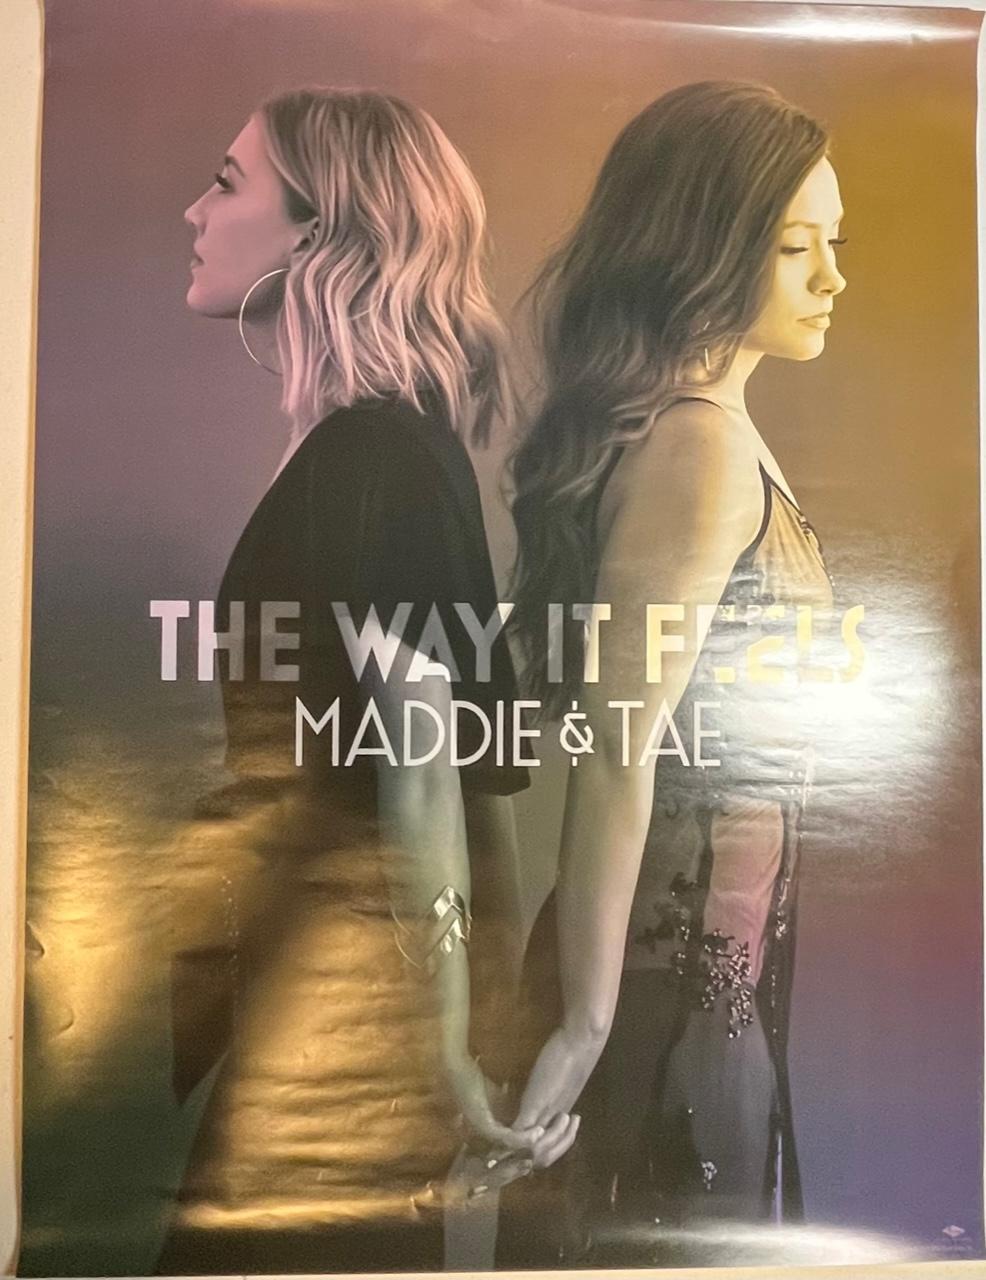 Music　It　Way　“The　Maddie　Tae　Country　South　Feels”　Poster　Florida